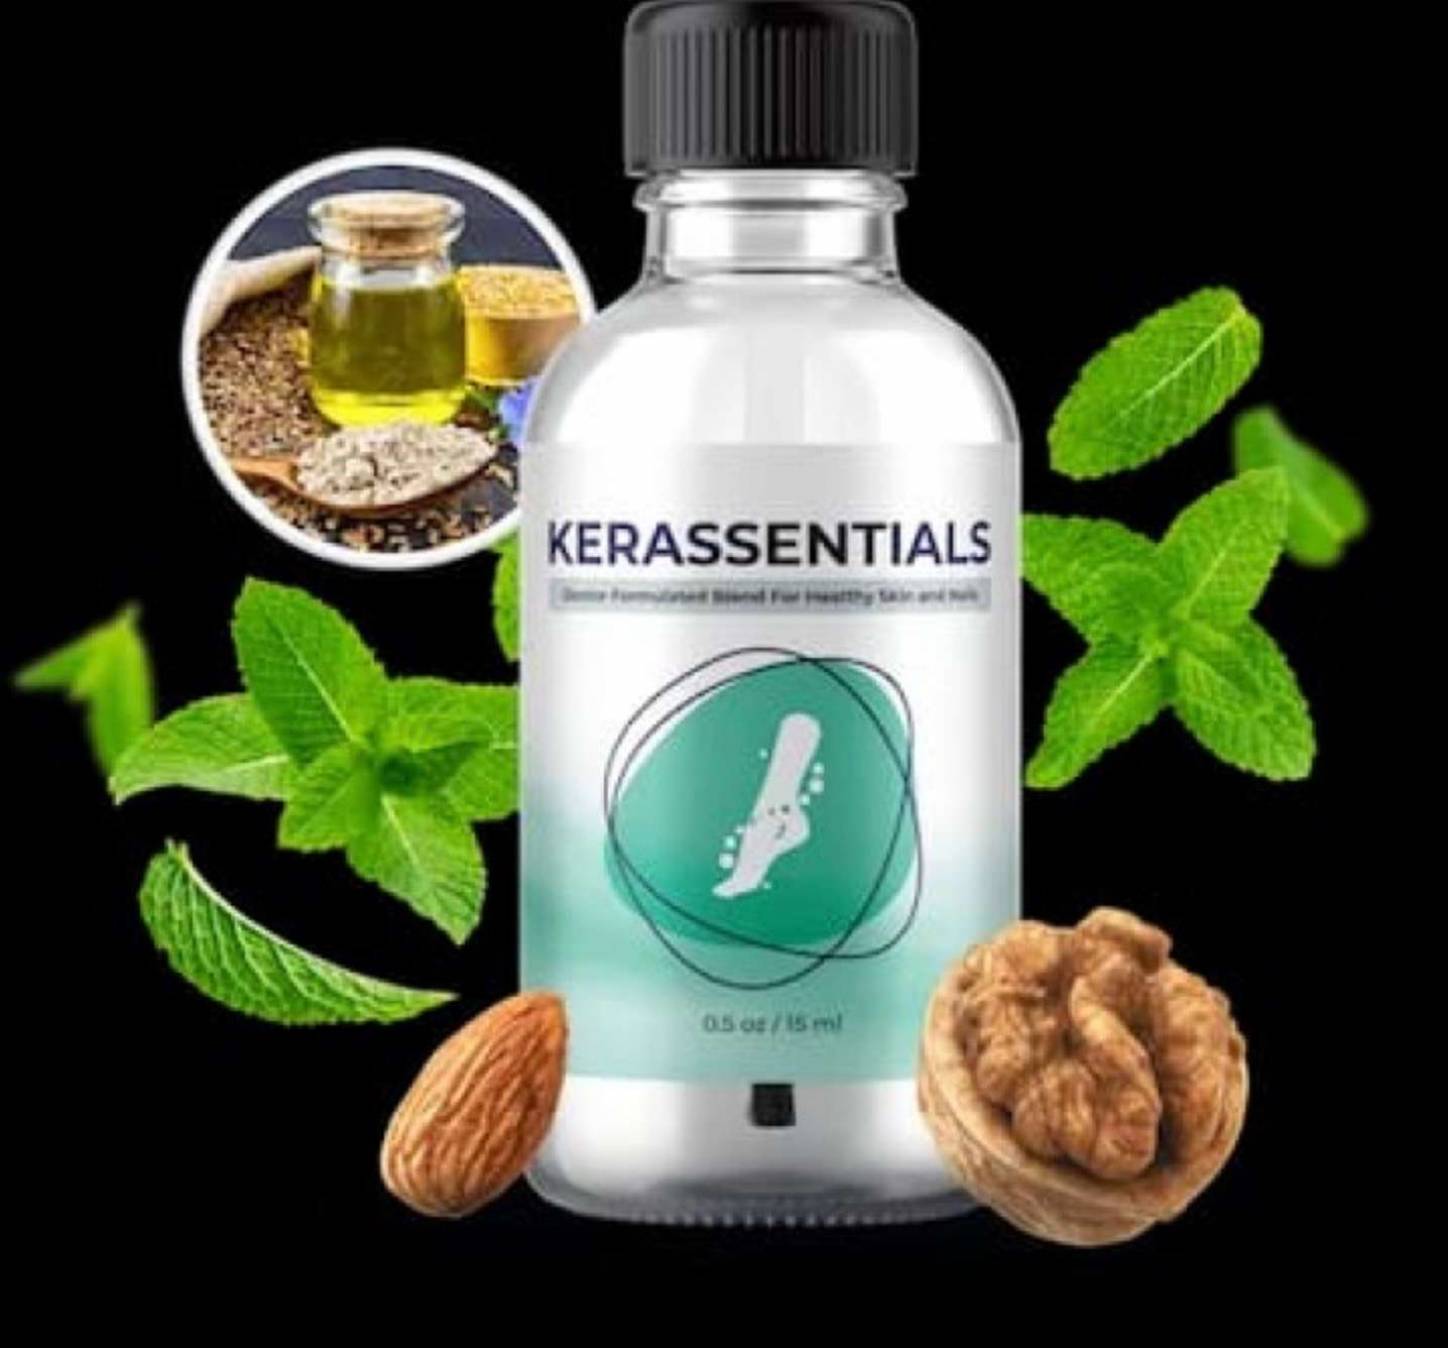 Where To Buy Kerassentials Near Me